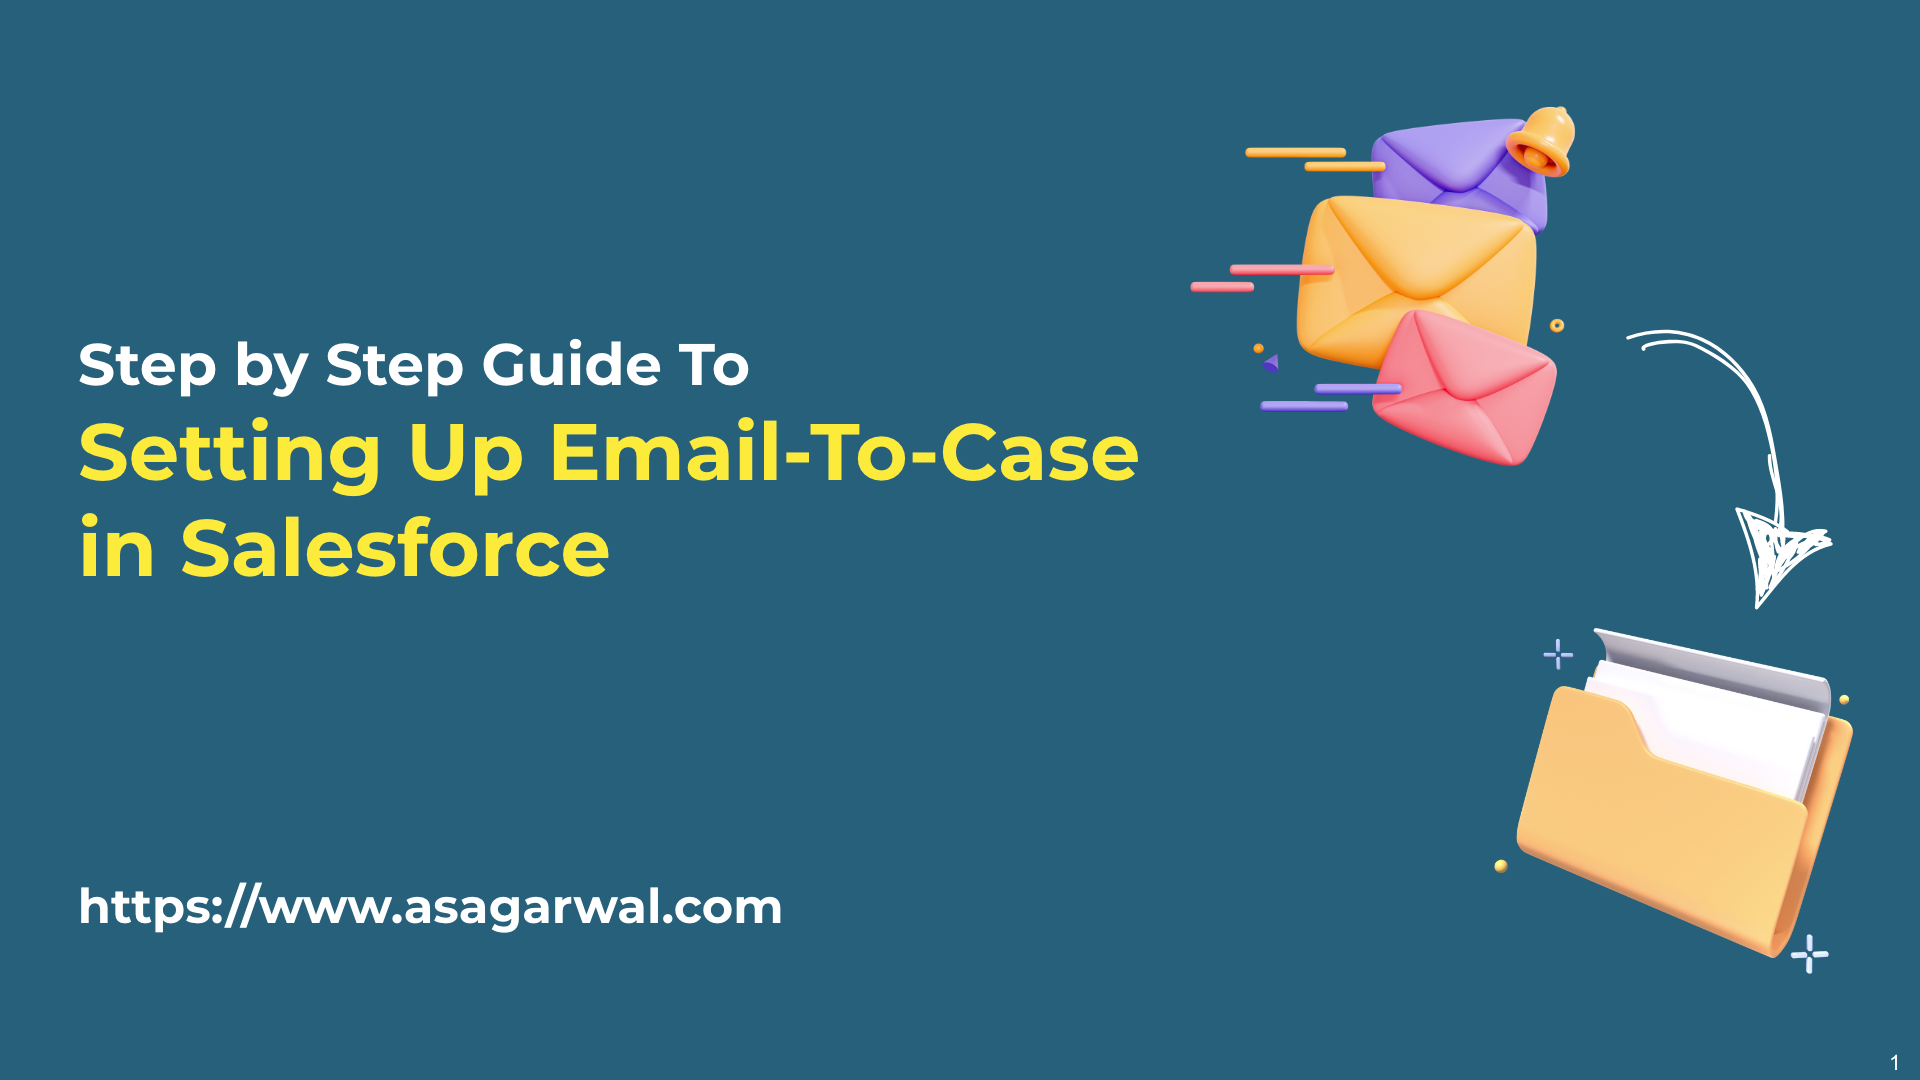 Step by Step Guide to Setting Up Email-To-Case in Salesforce